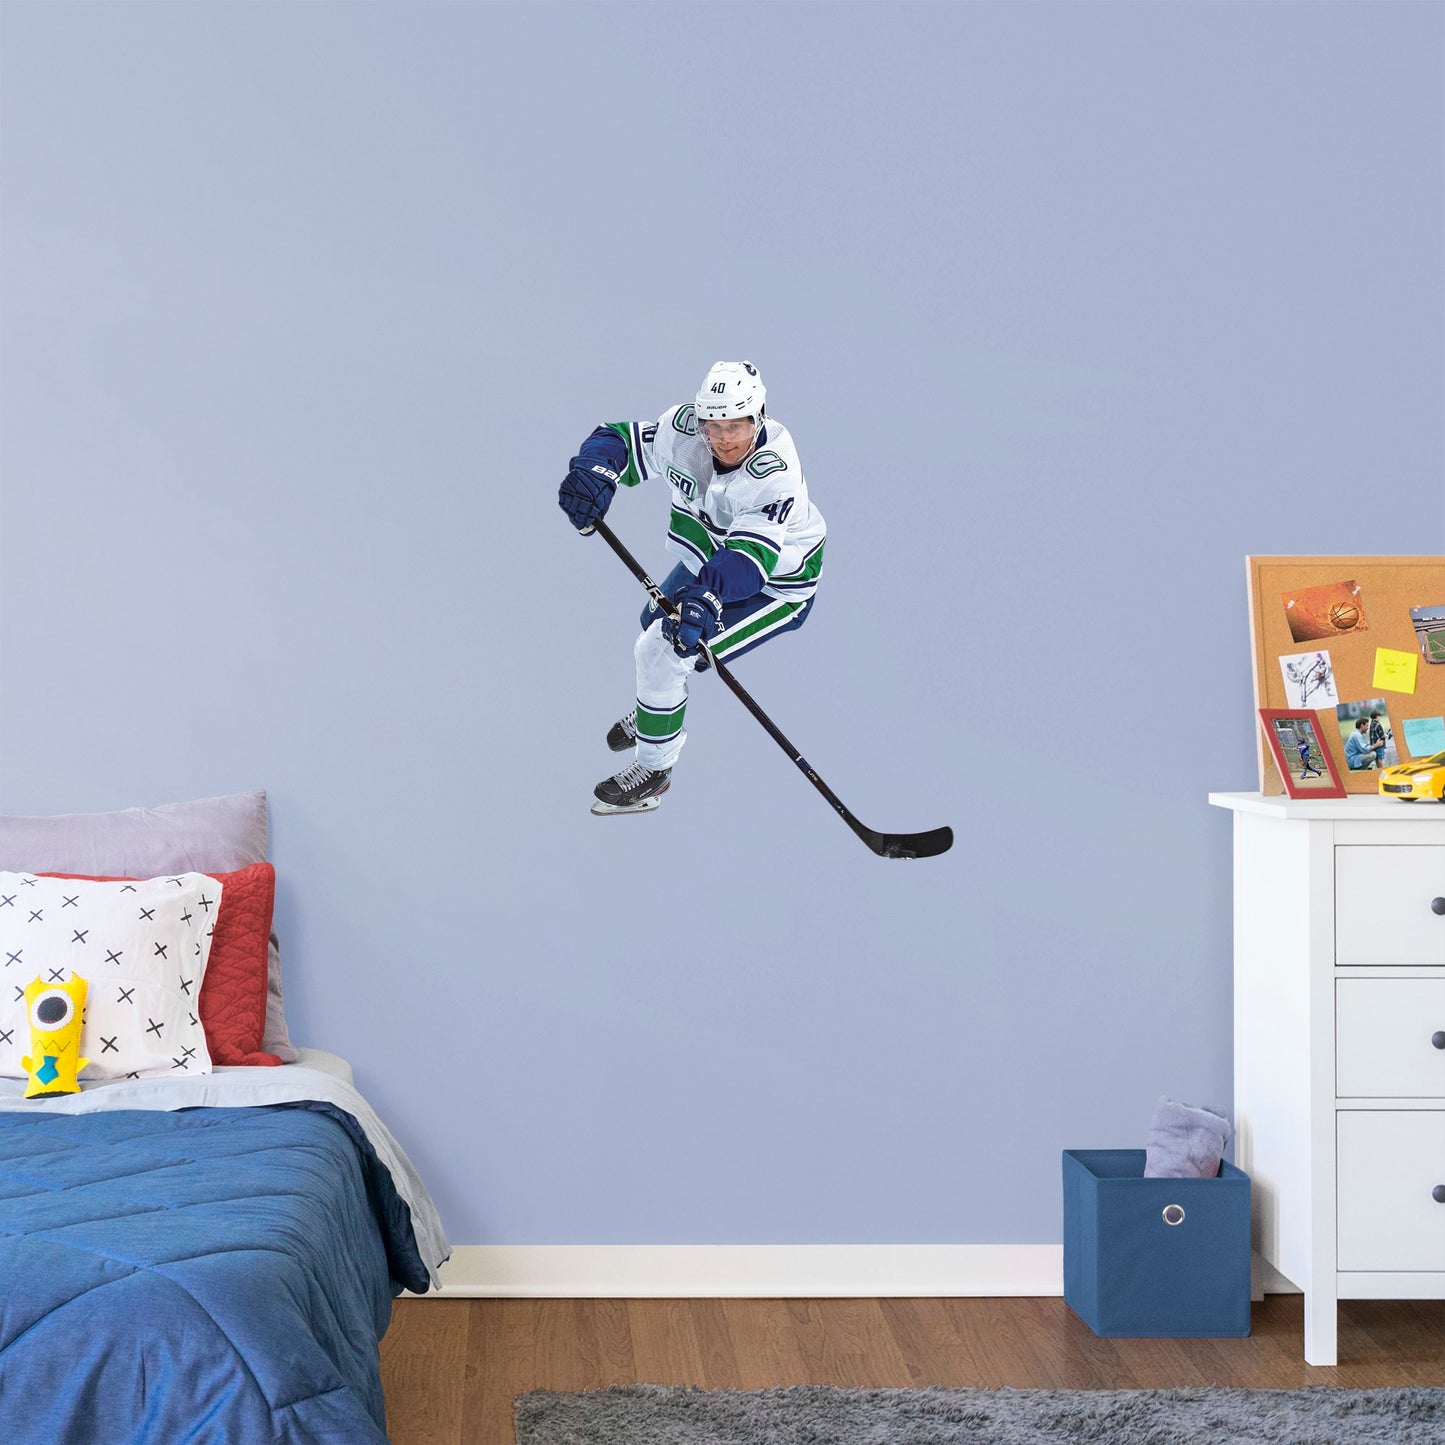 X-Large Athlete + 2 Decals (33"W x 42"H) Elias Peterson has been a standout in the league since the very beginning, and now you can bring him to life in your own home with this Officially Licensed NHL Removable Wall Decal! Canucks fans and NHL fanatics alike will love this durable and high quality wall decal and, with the excitement it brings to your space, it's almost as good as being at Rogers Arena!